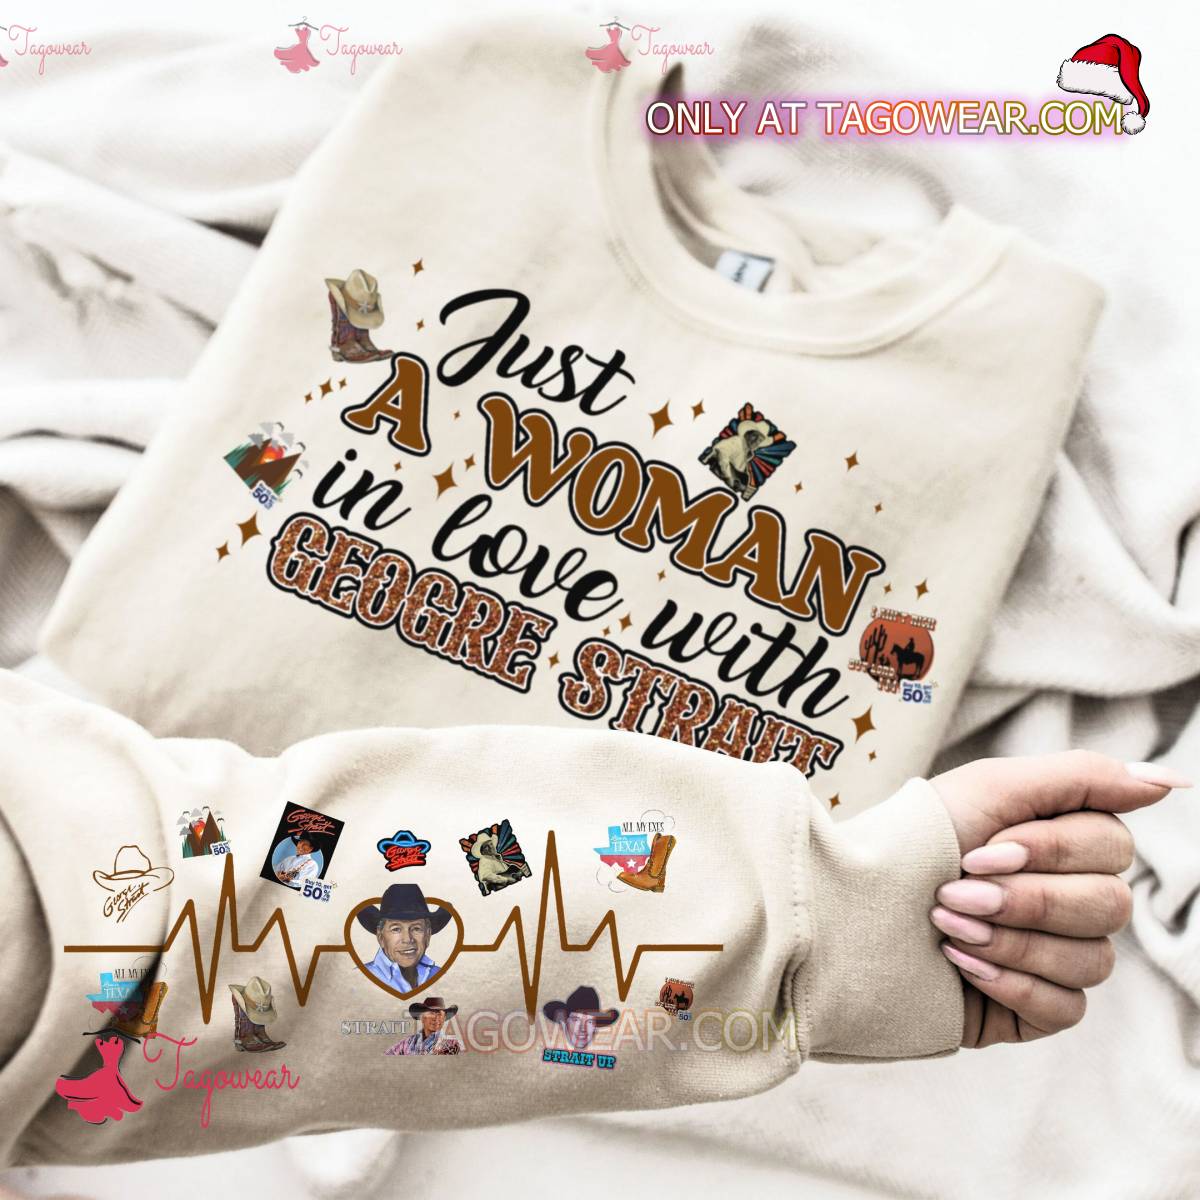 Just A Women In Love With George Strait Sweatshirt a